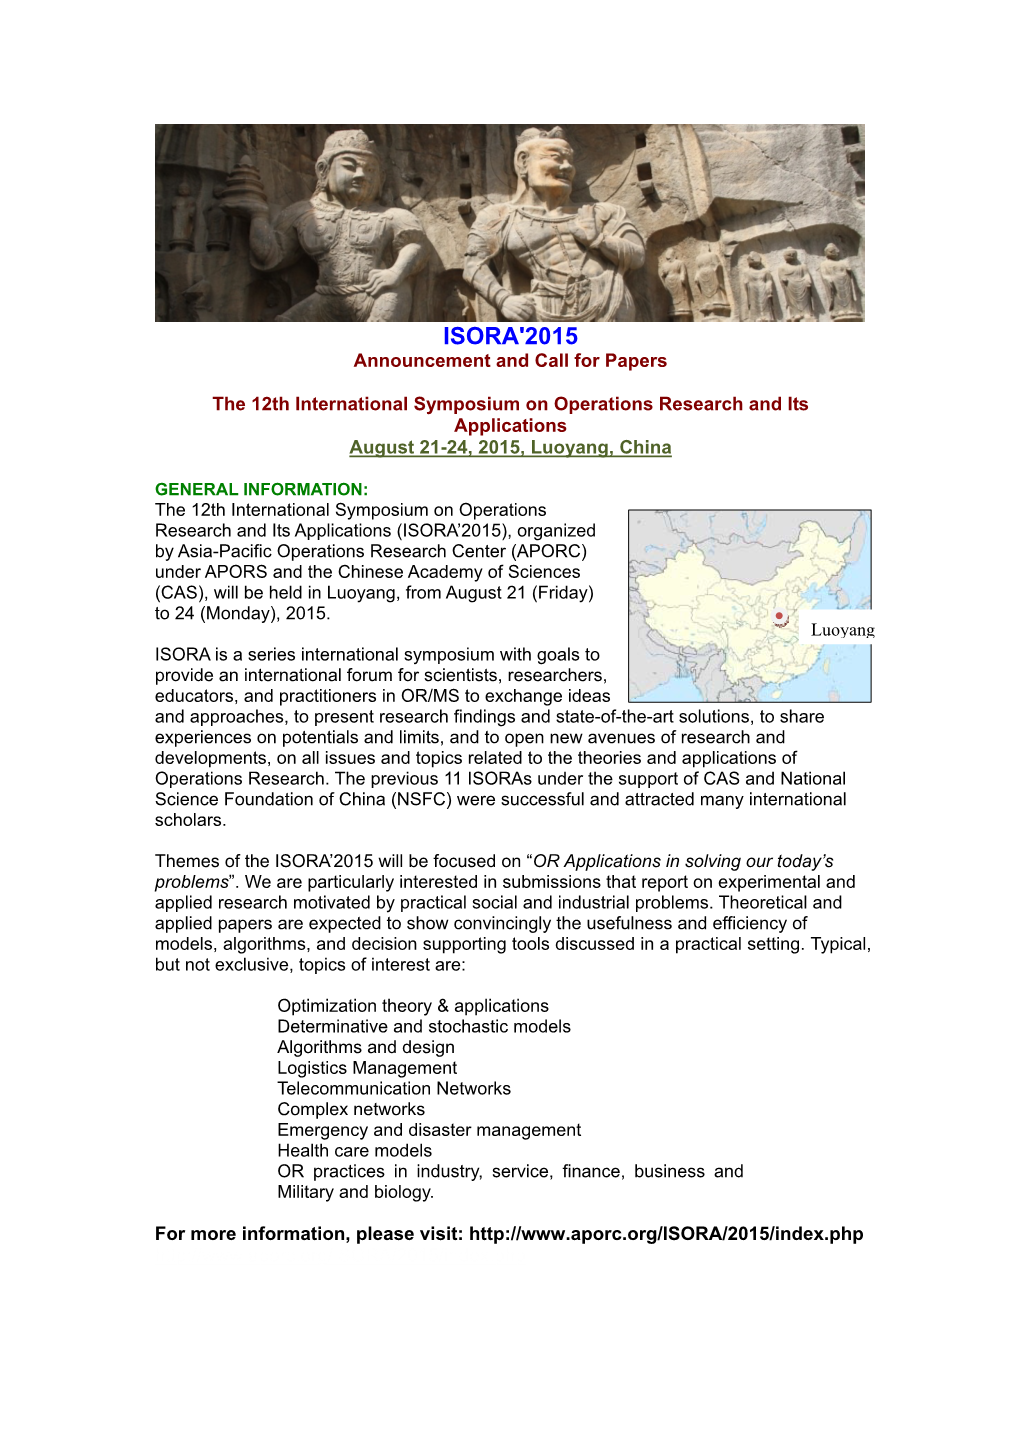 ISORA'2015 Announcement and Call for Papers